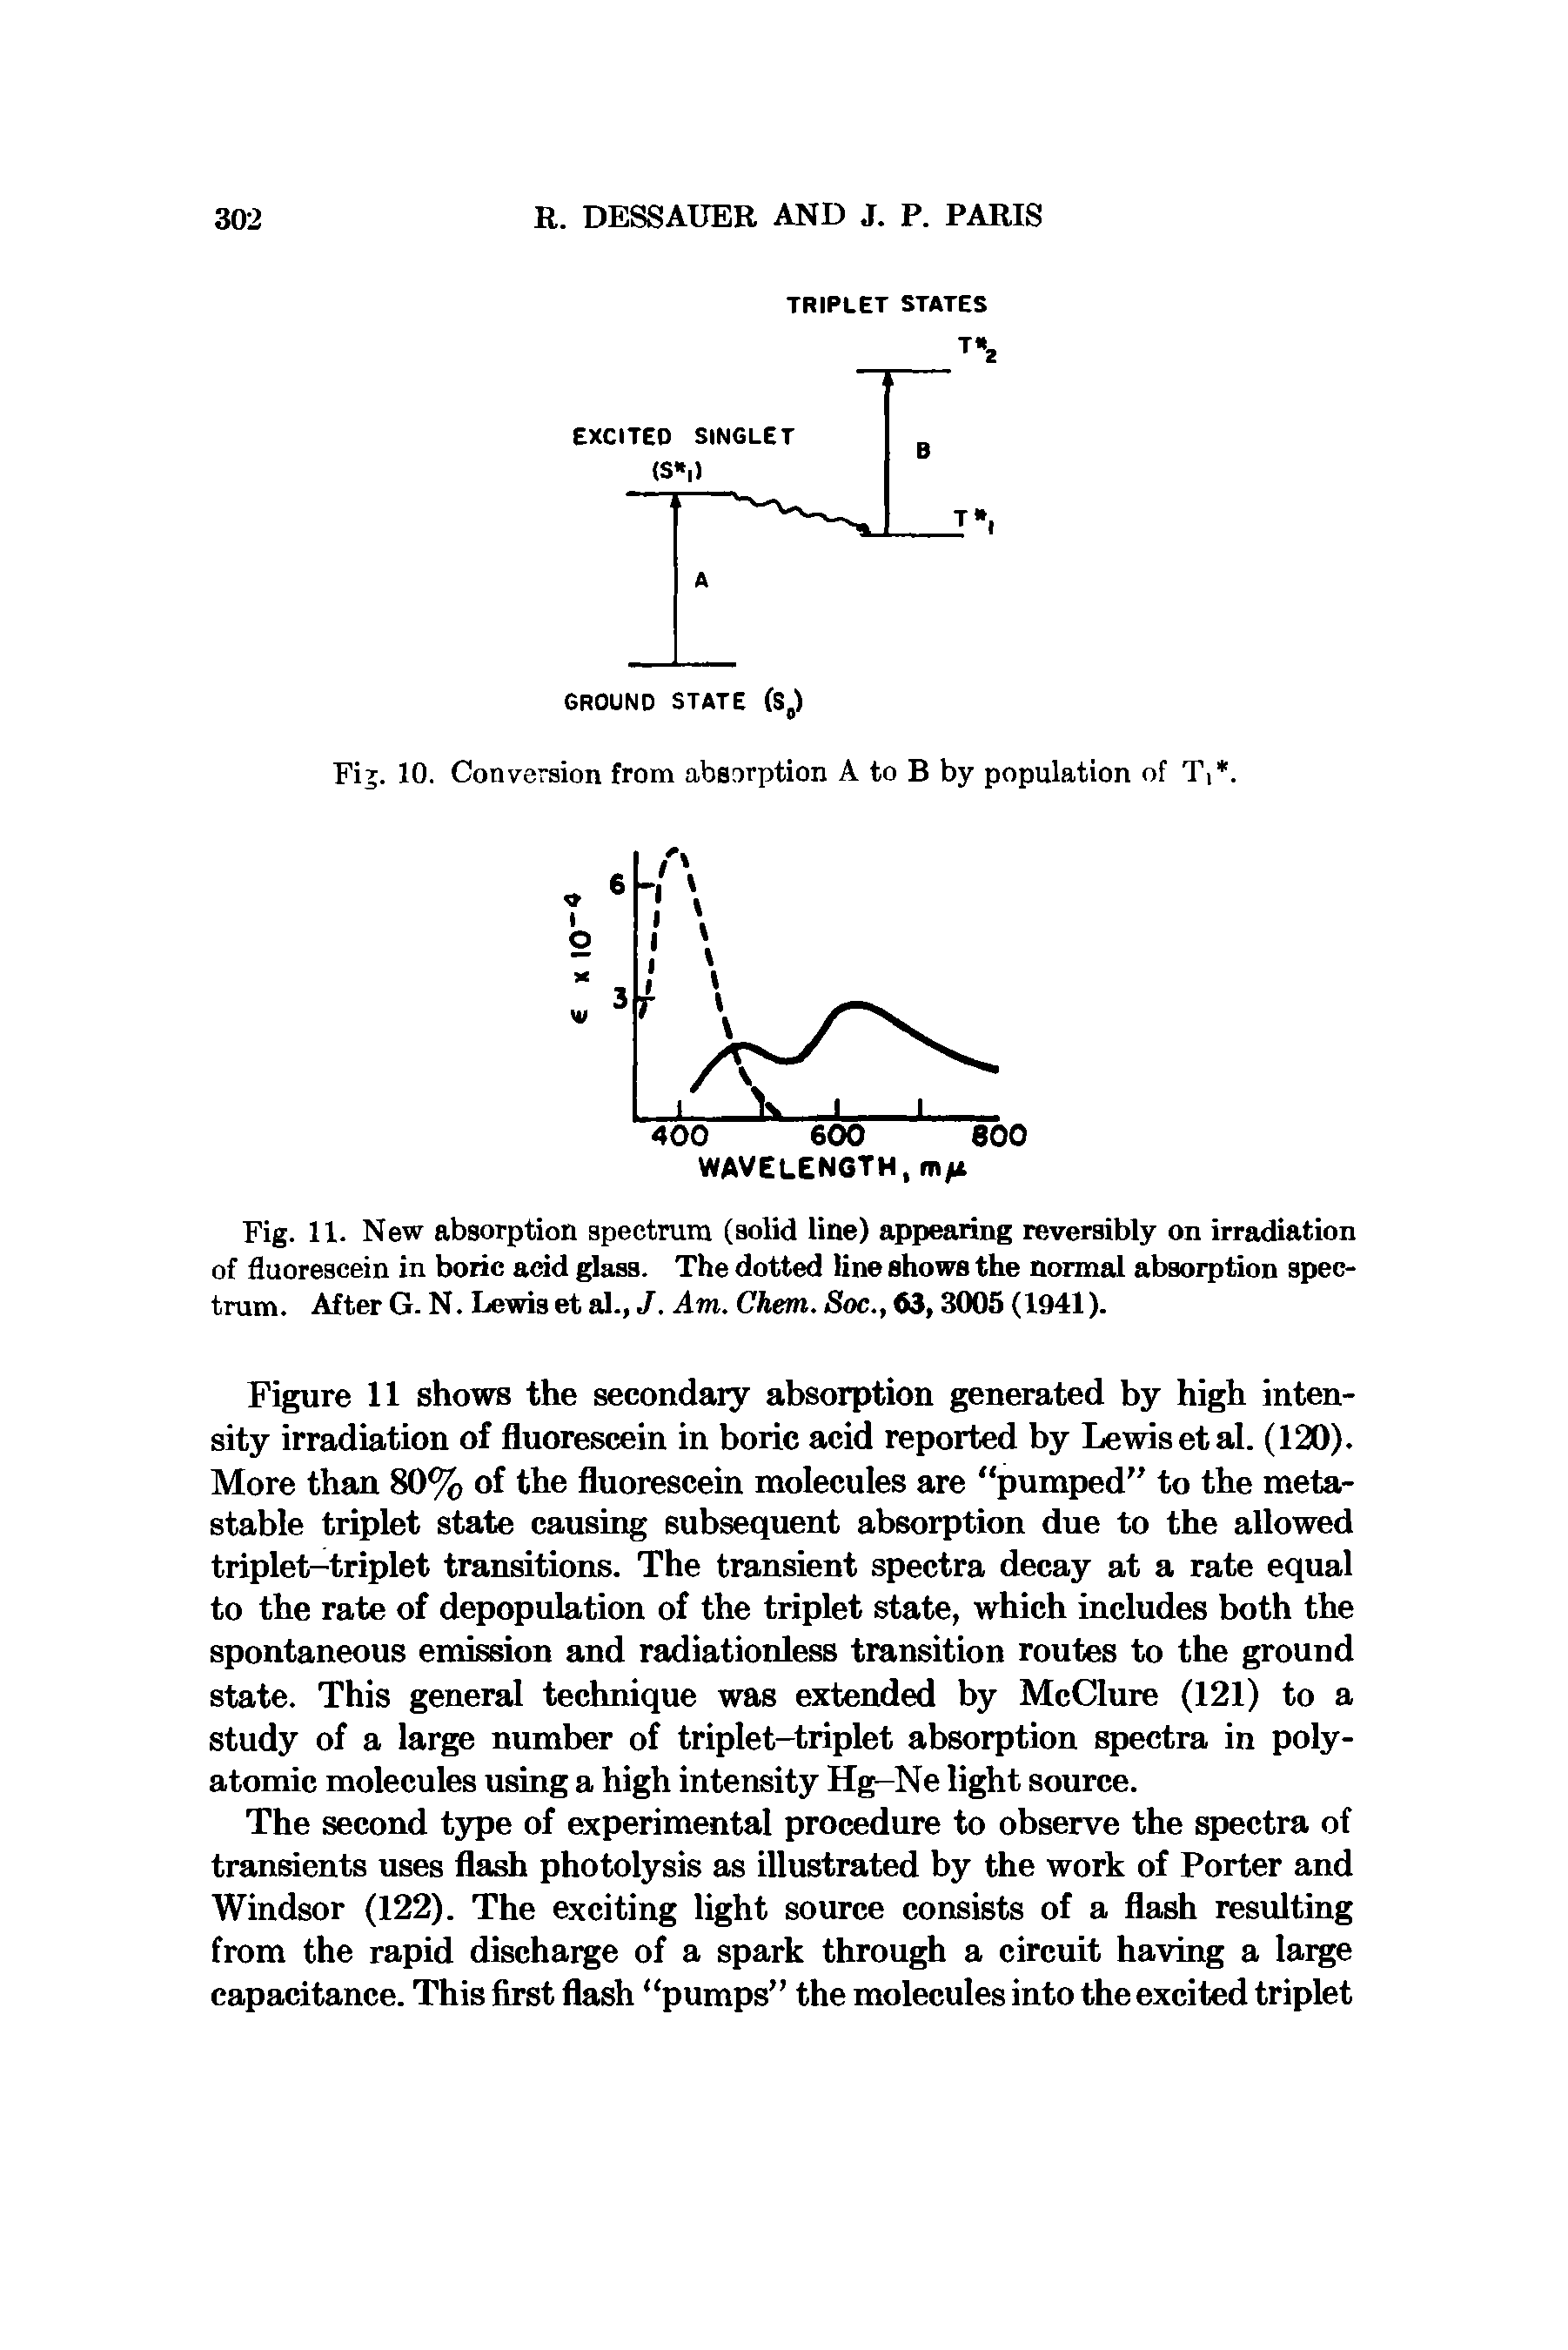 Fig. 11. New absorption spectrum (solid line) appearing reversibly on irradiation of fluorescein in boric acid glass. The dotted line shows the normal absorption spectrum. After G. N. Lewis et al., J. Am. Ckem. Soc., to, 3005 (1941).